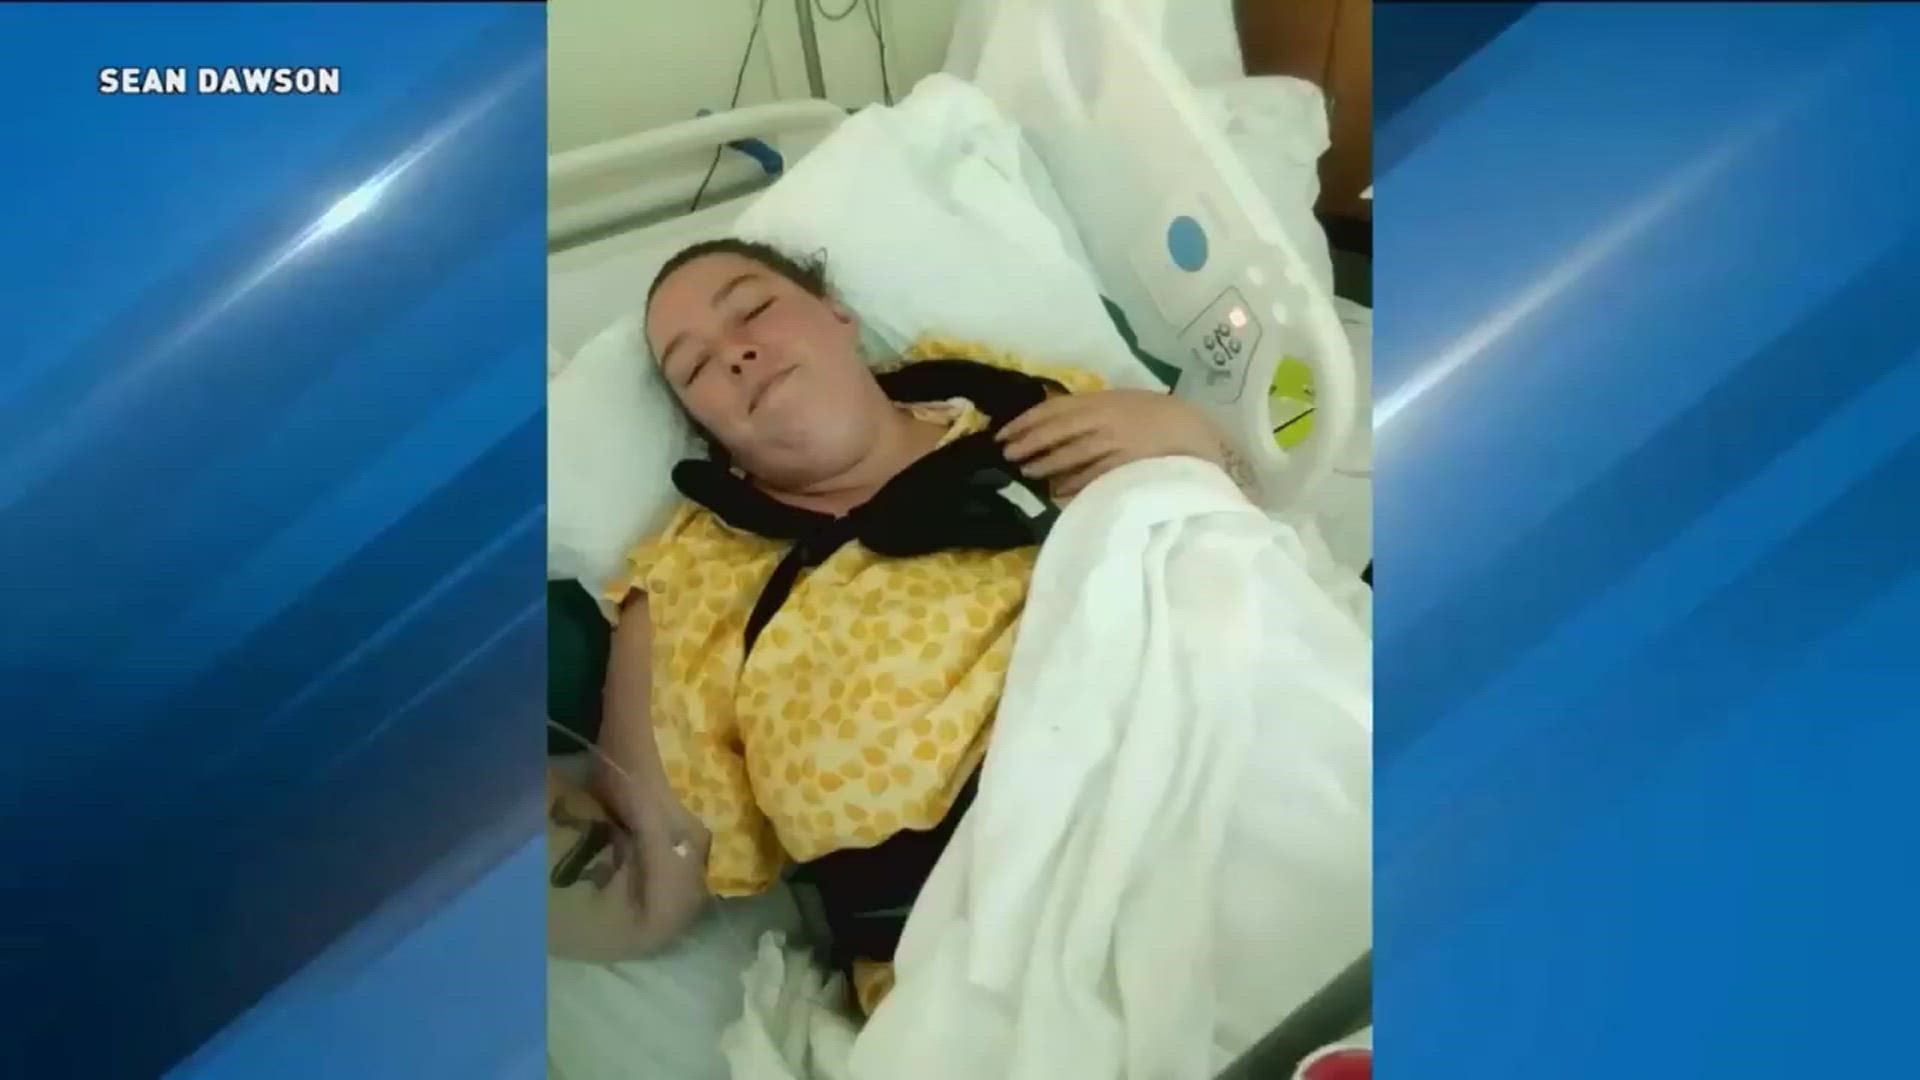 The mother is hospitalized and unable to walk after a vertebrae in her spine shattered.